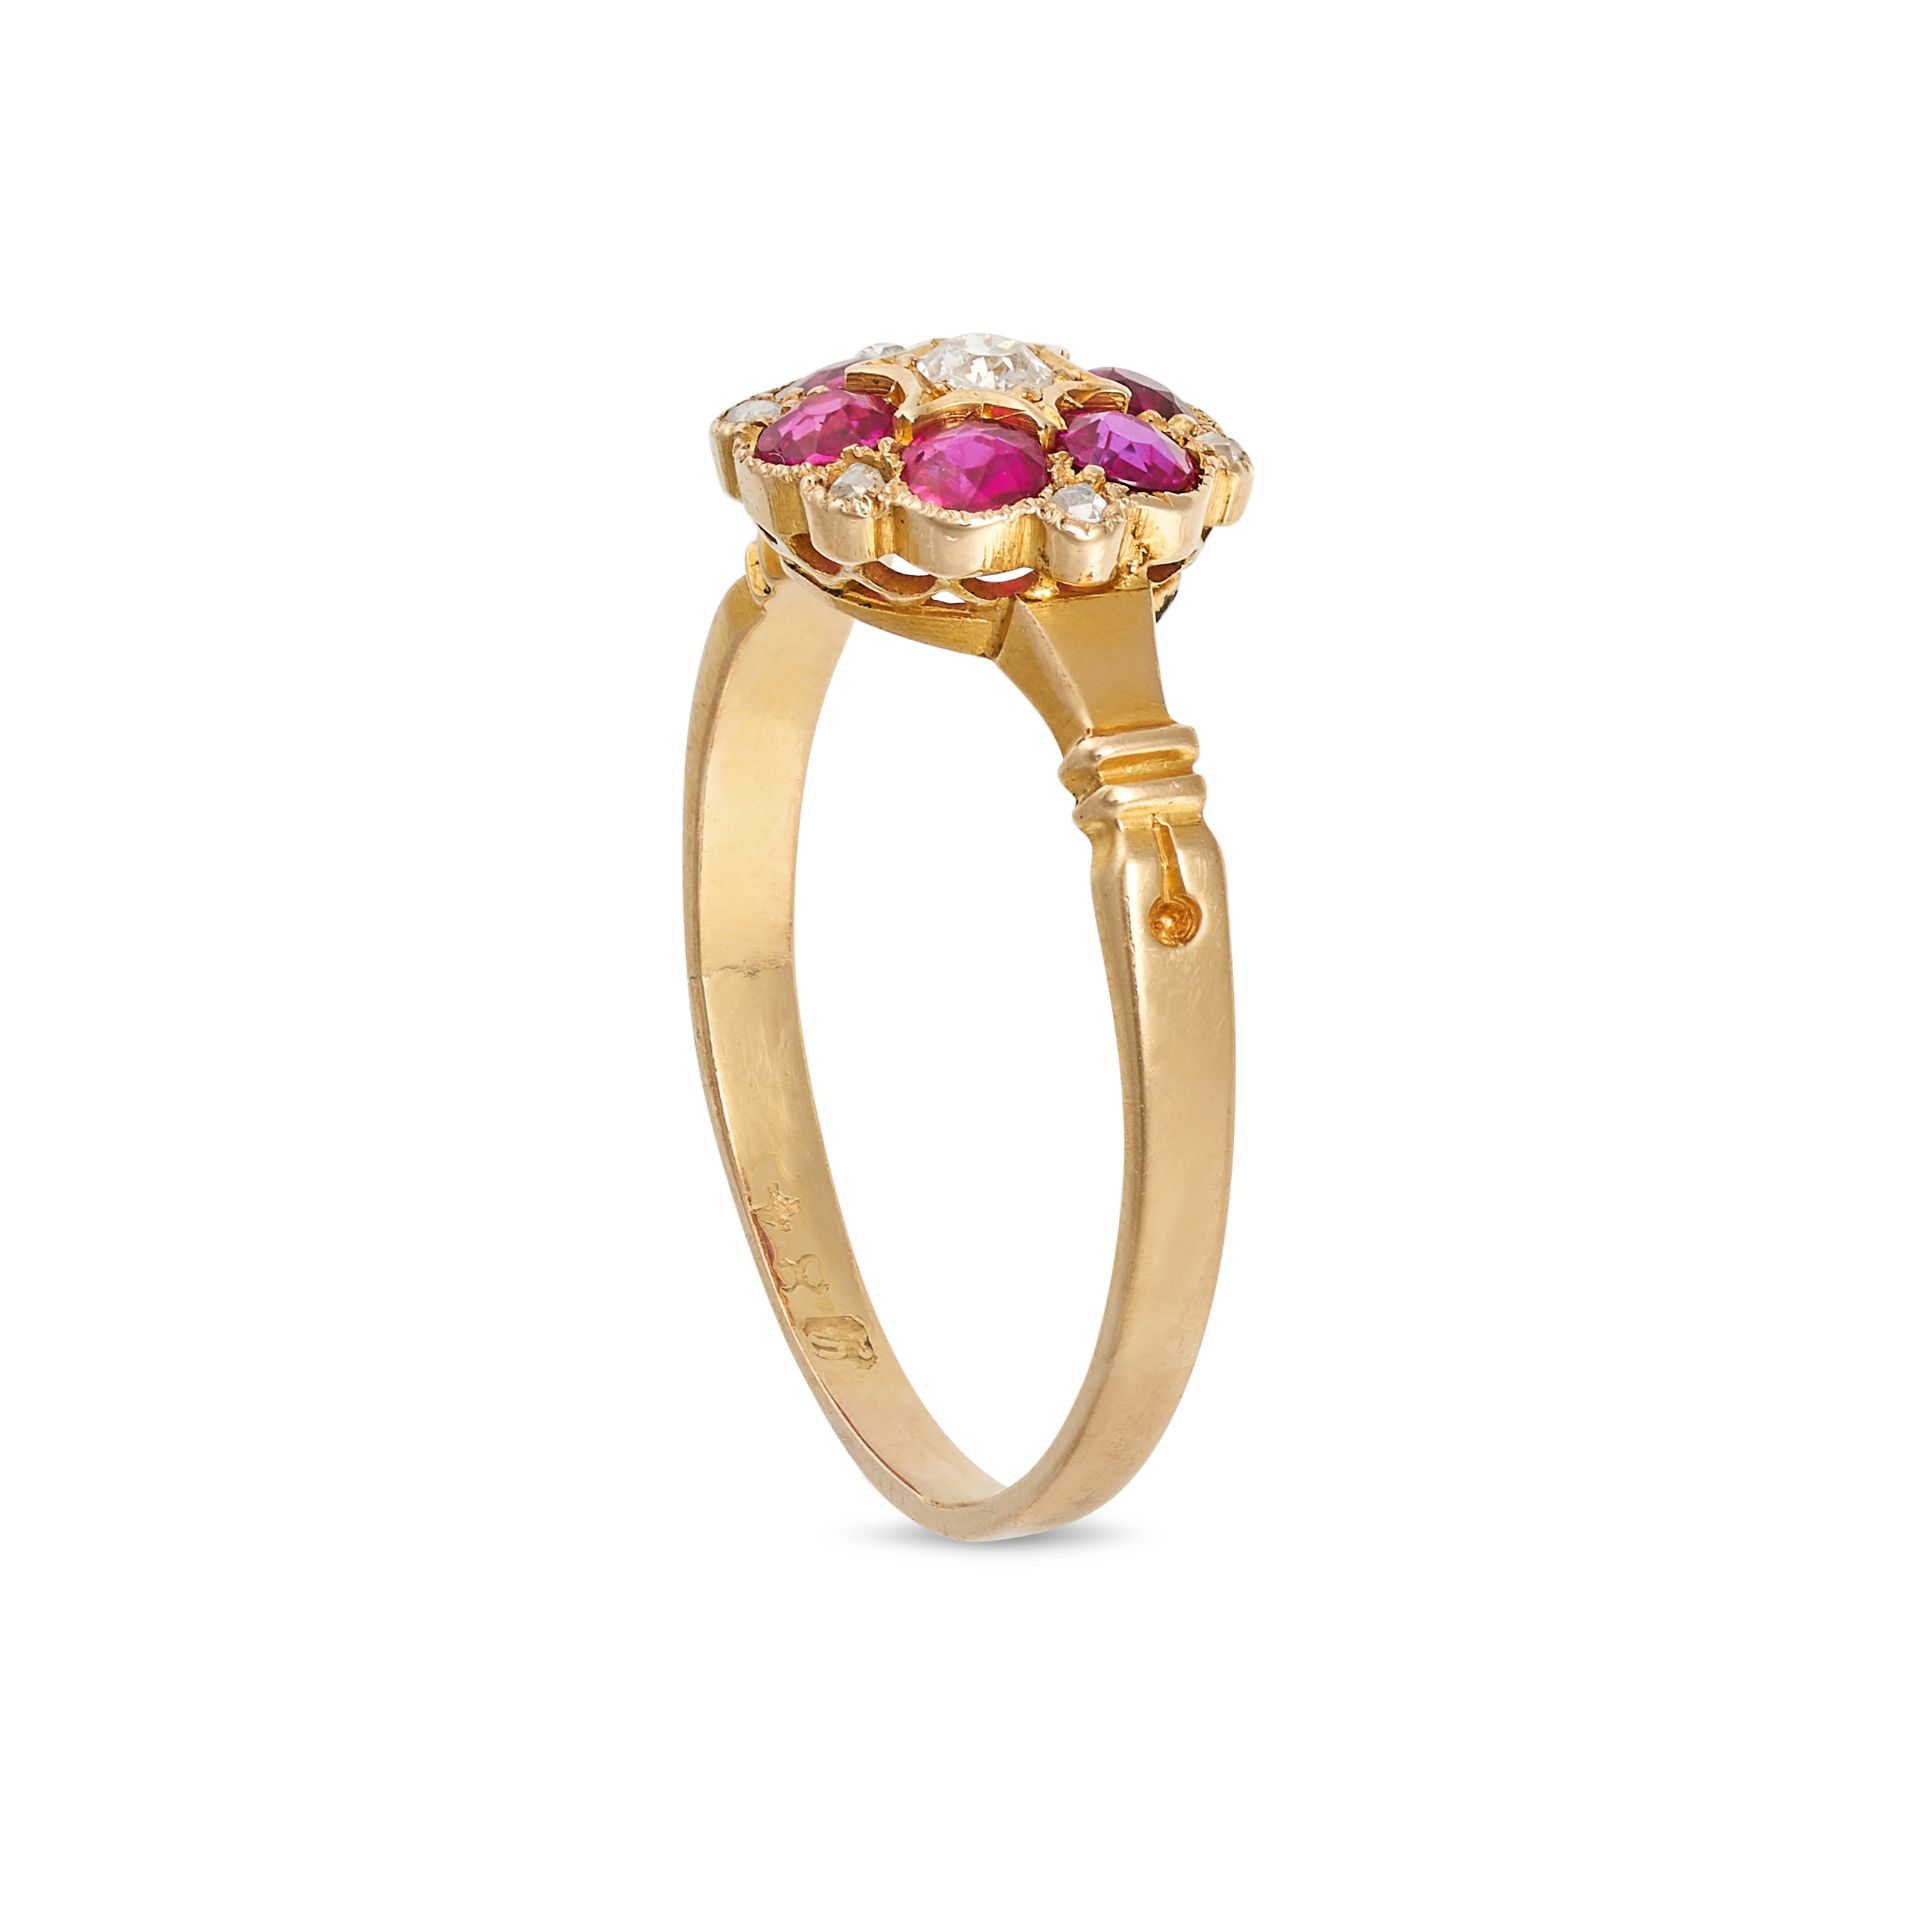 NO RESERVE - AN ANTIQUE RUBY AND DIAMOND CLUSTER RING in 18ct yellow gold, set with an old cut di... - Image 2 of 2